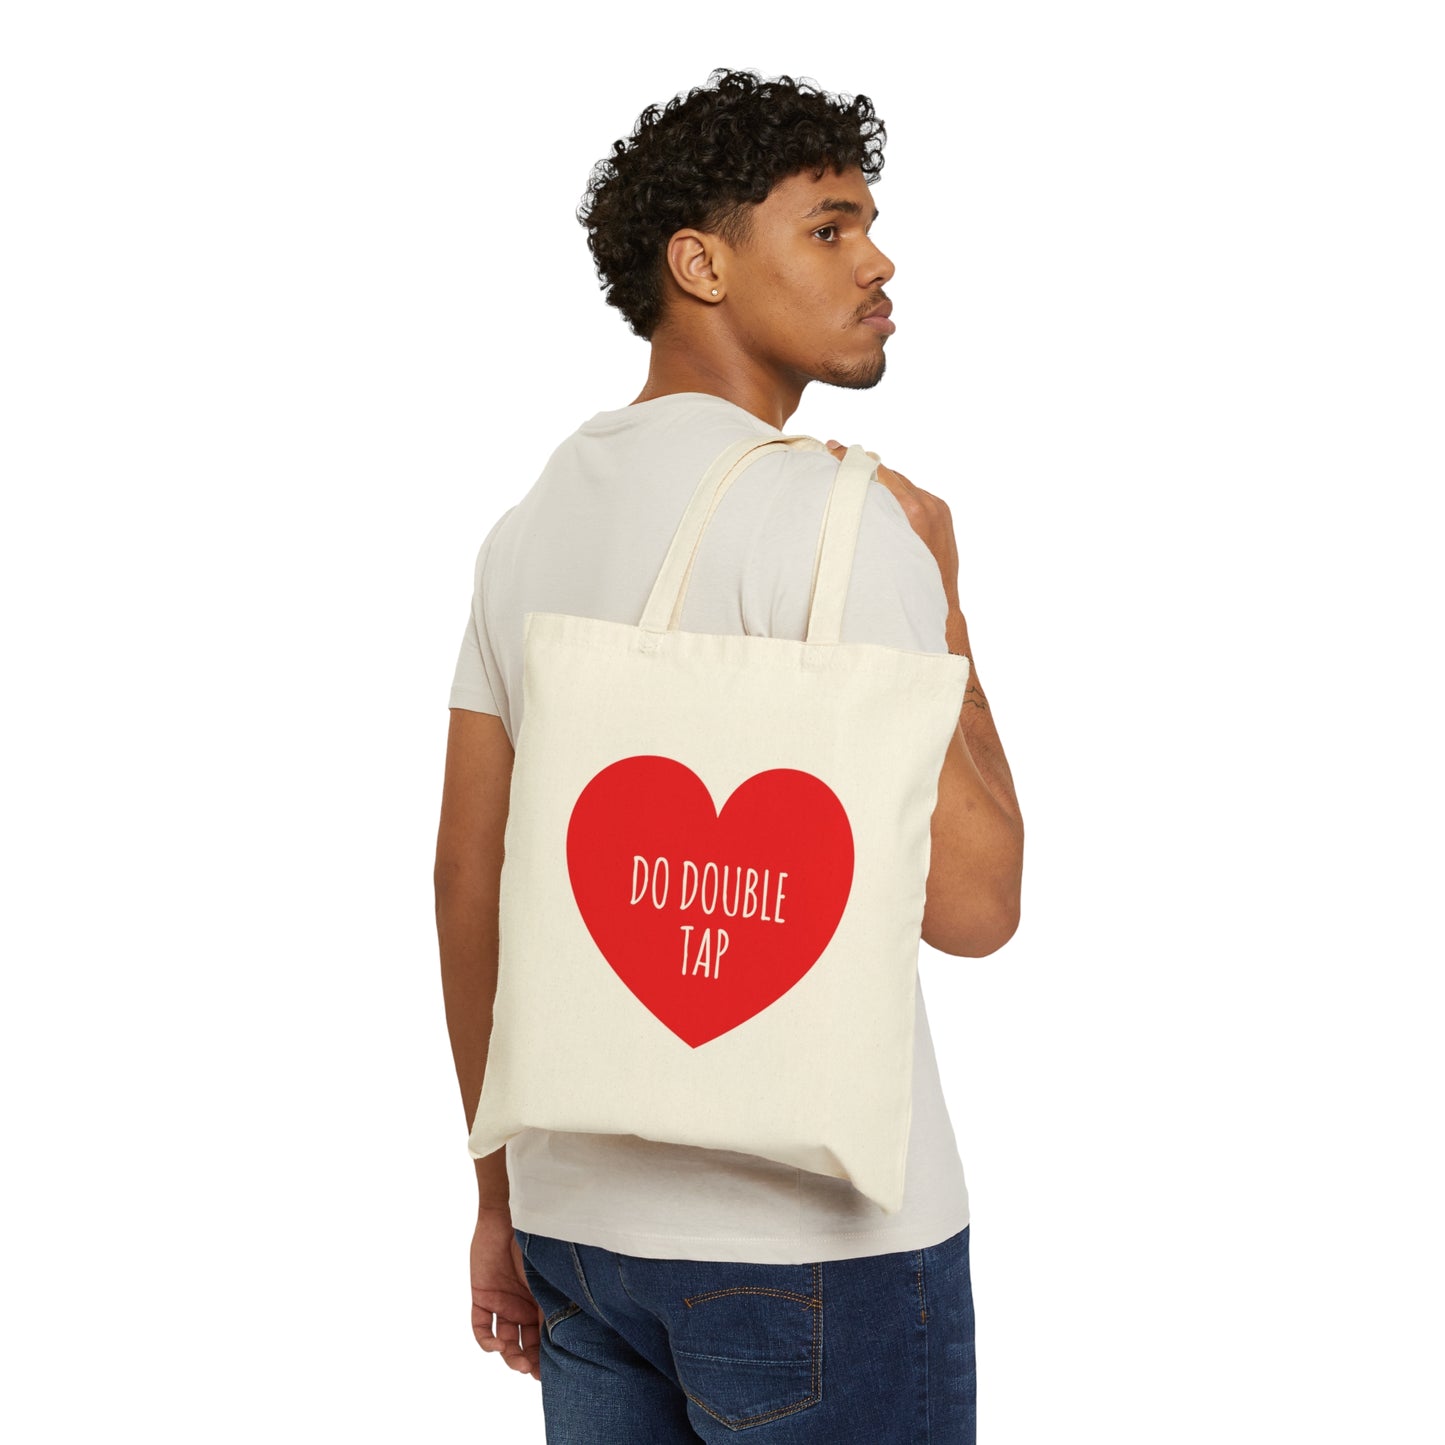 Do Double Tap Heart Romantic National Couples Day Canvas Shopping Cotton Tote Bag